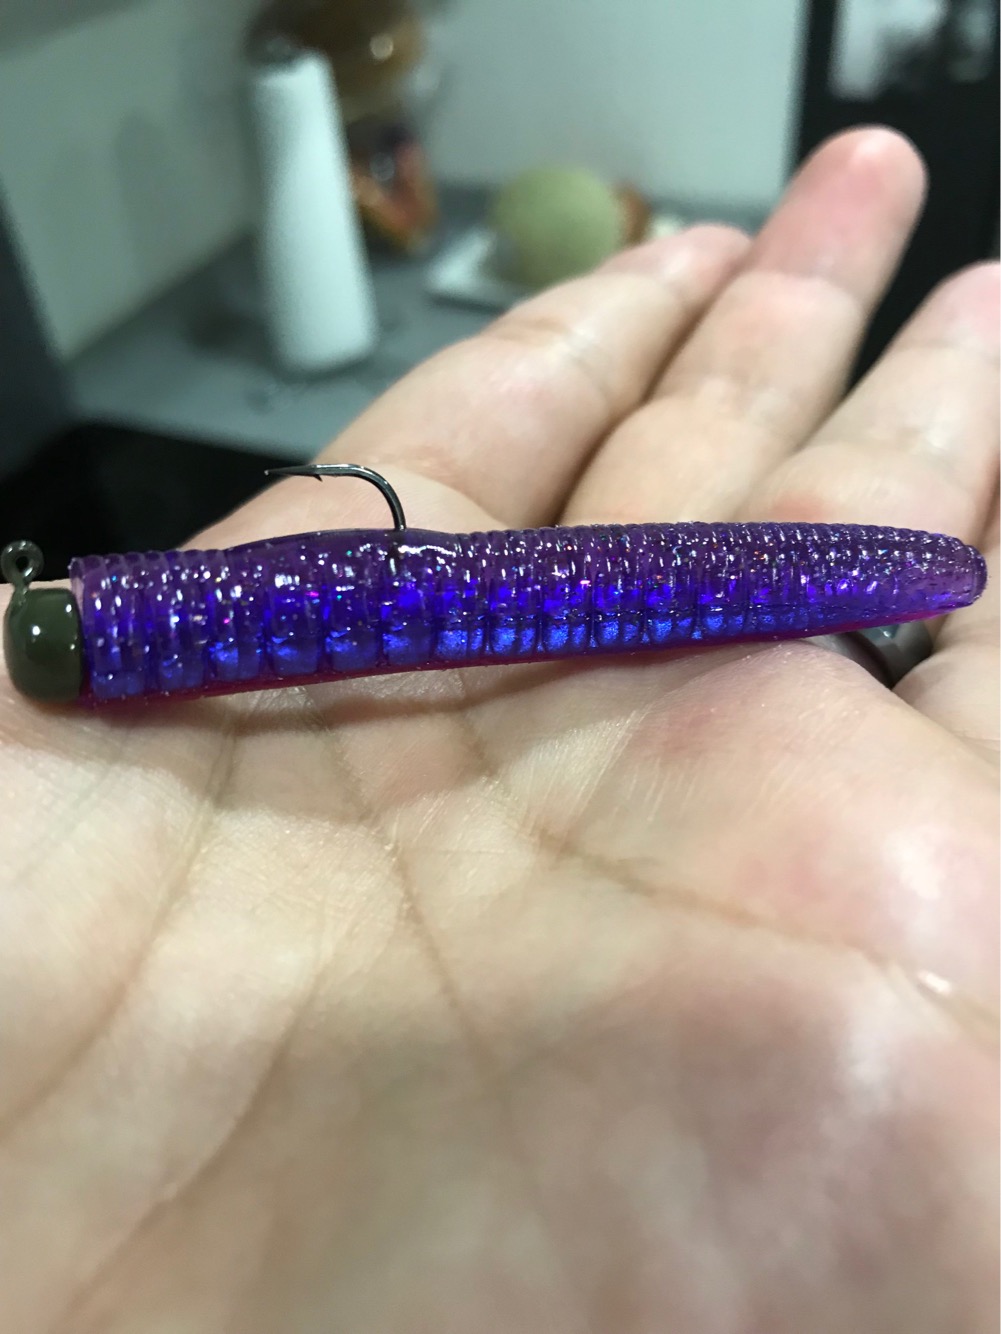 Roboworm Ned Worm - Fishing Tackle - Bass Fishing Forums